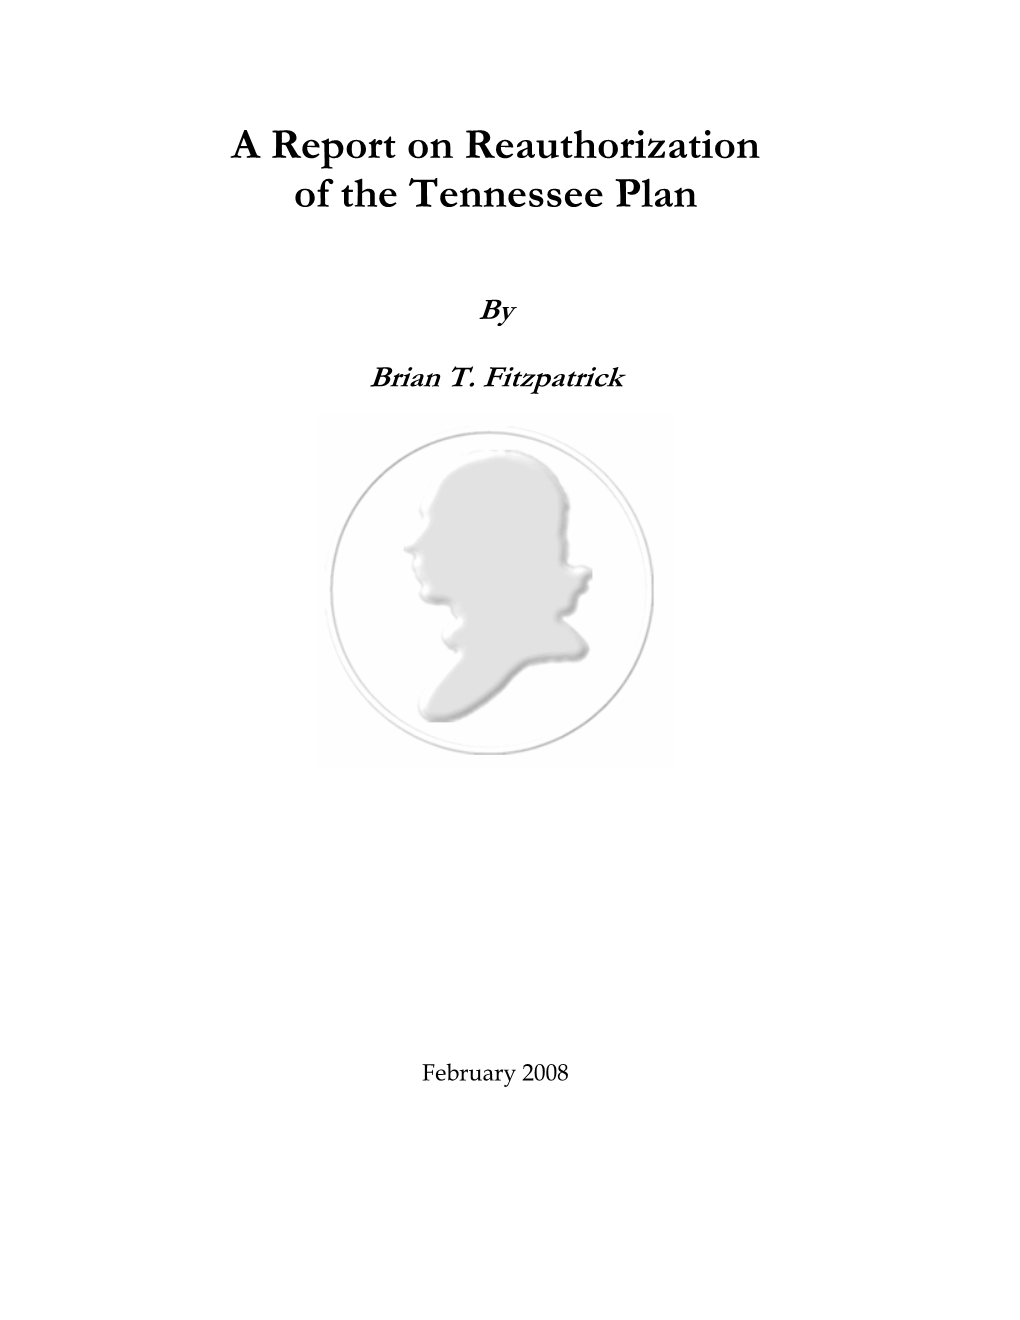 Tennessee Plan Outline